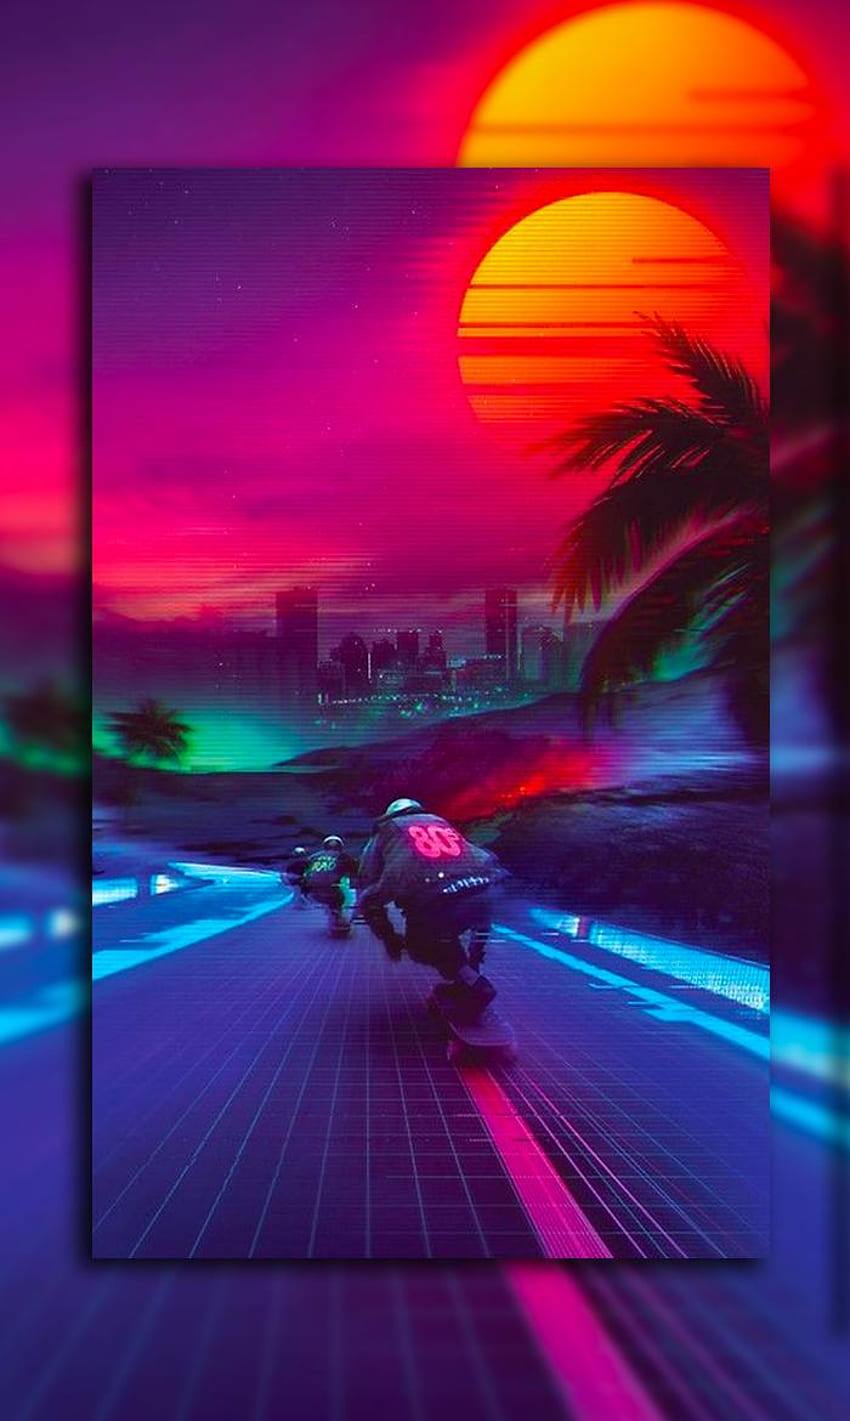 1366x768px 720p Free Download 80s Aesthetic Vibey Hd Phone